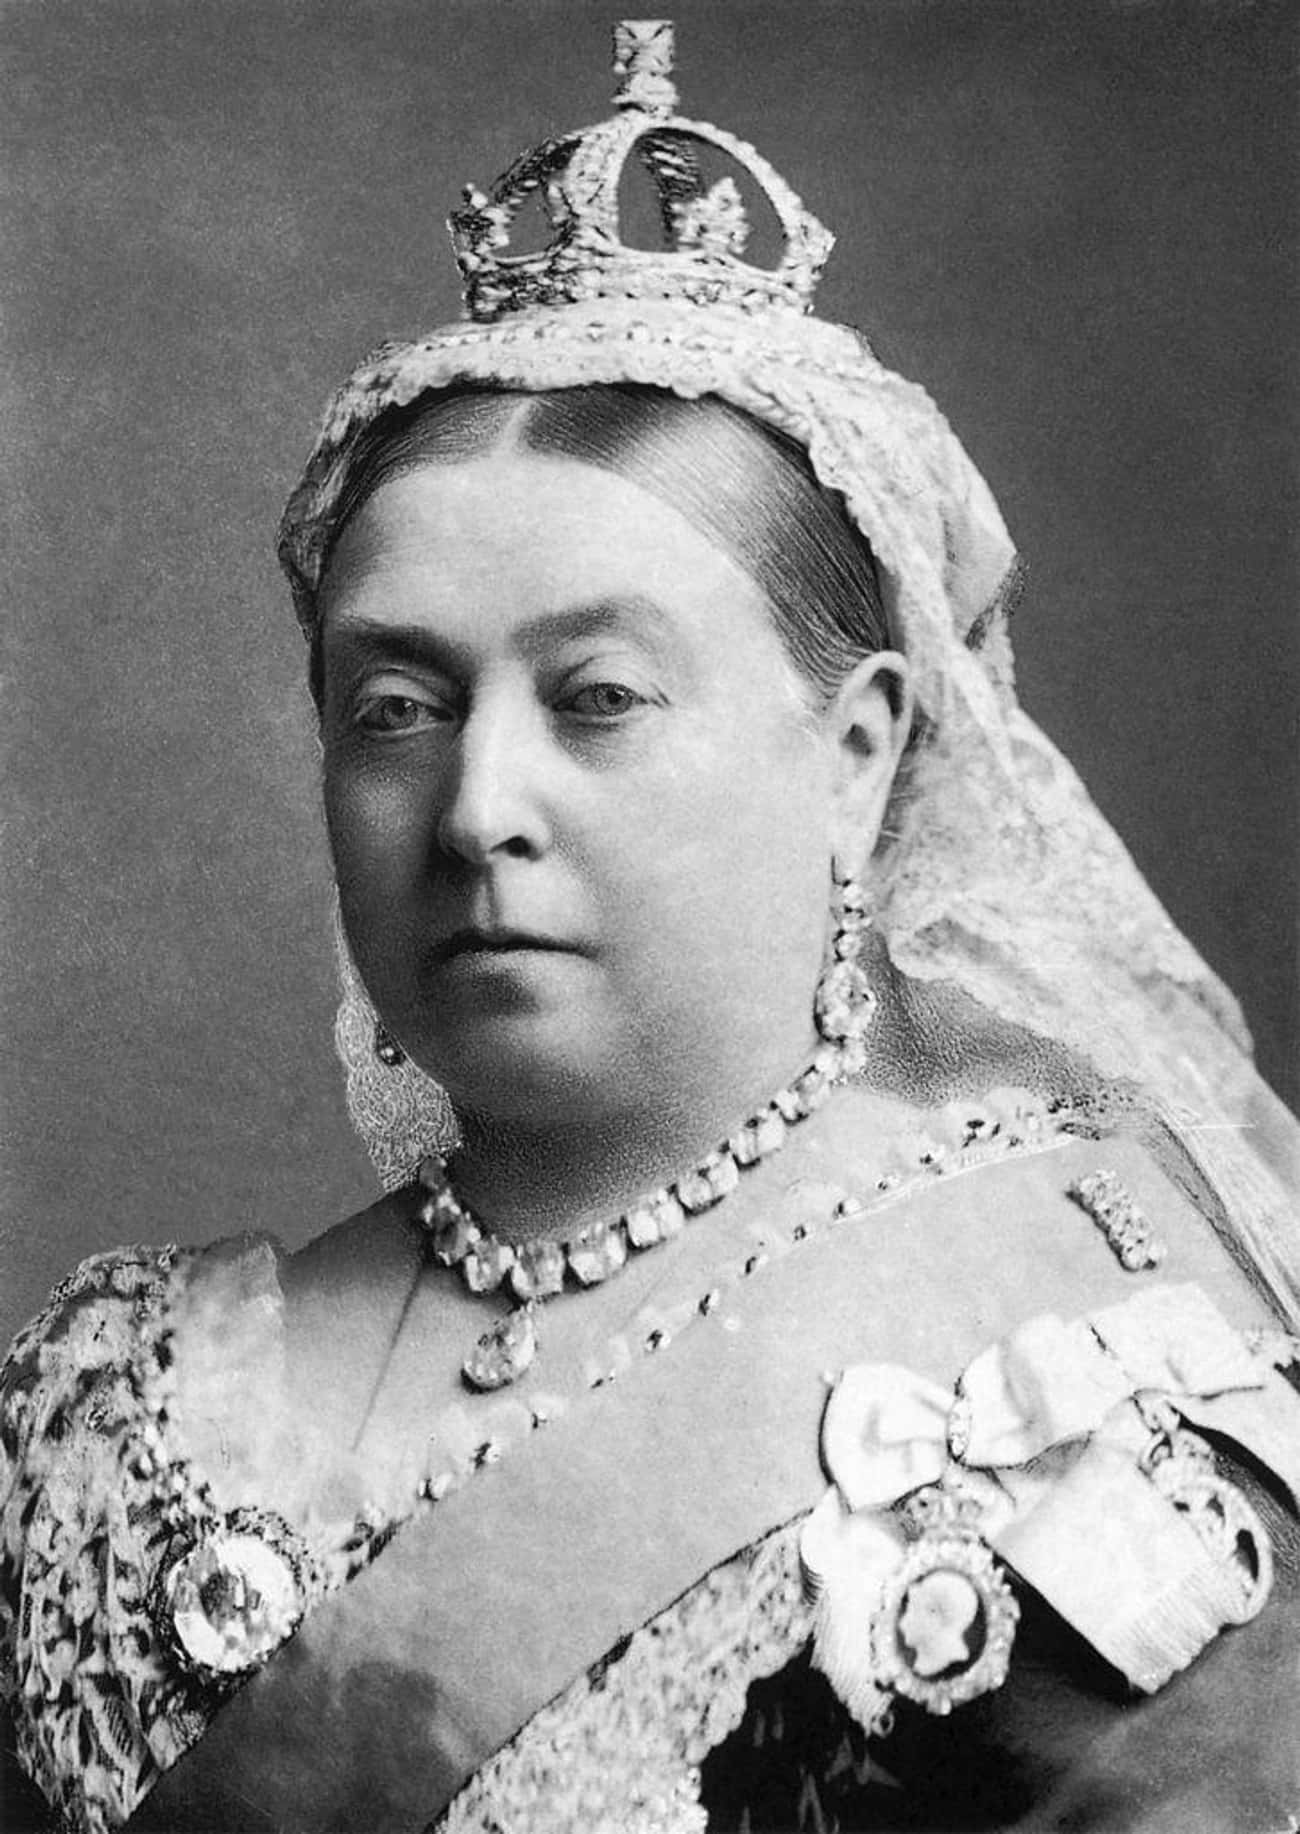 Viscounts Were So Rare Queen Victoria Noted Their Absence At Her Coronation